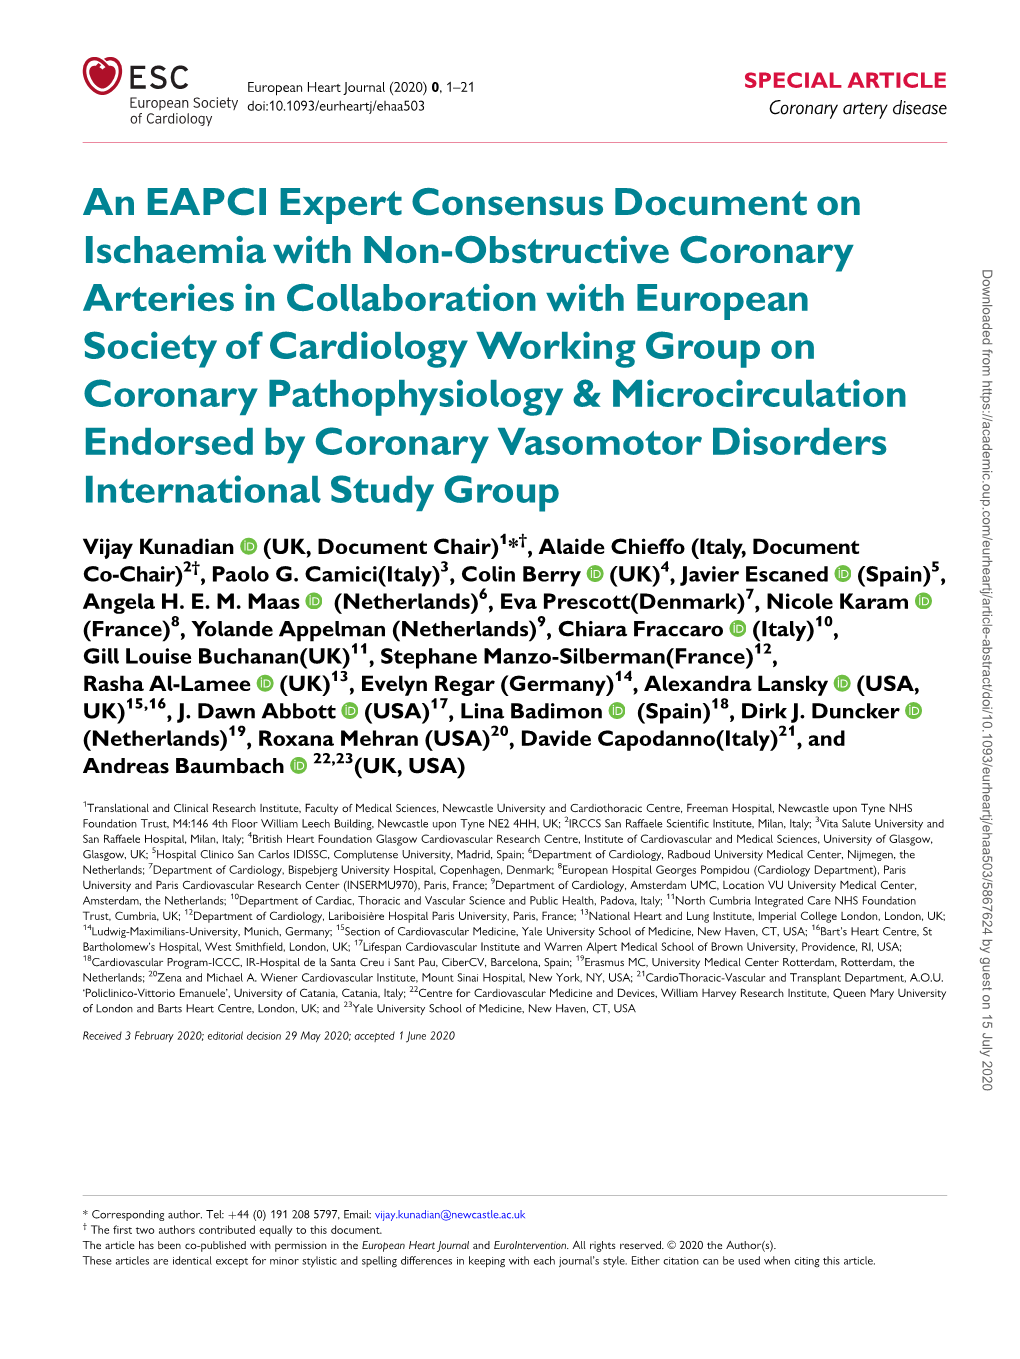 An EAPCI Expert Consensus Document on Ischaemia with Non